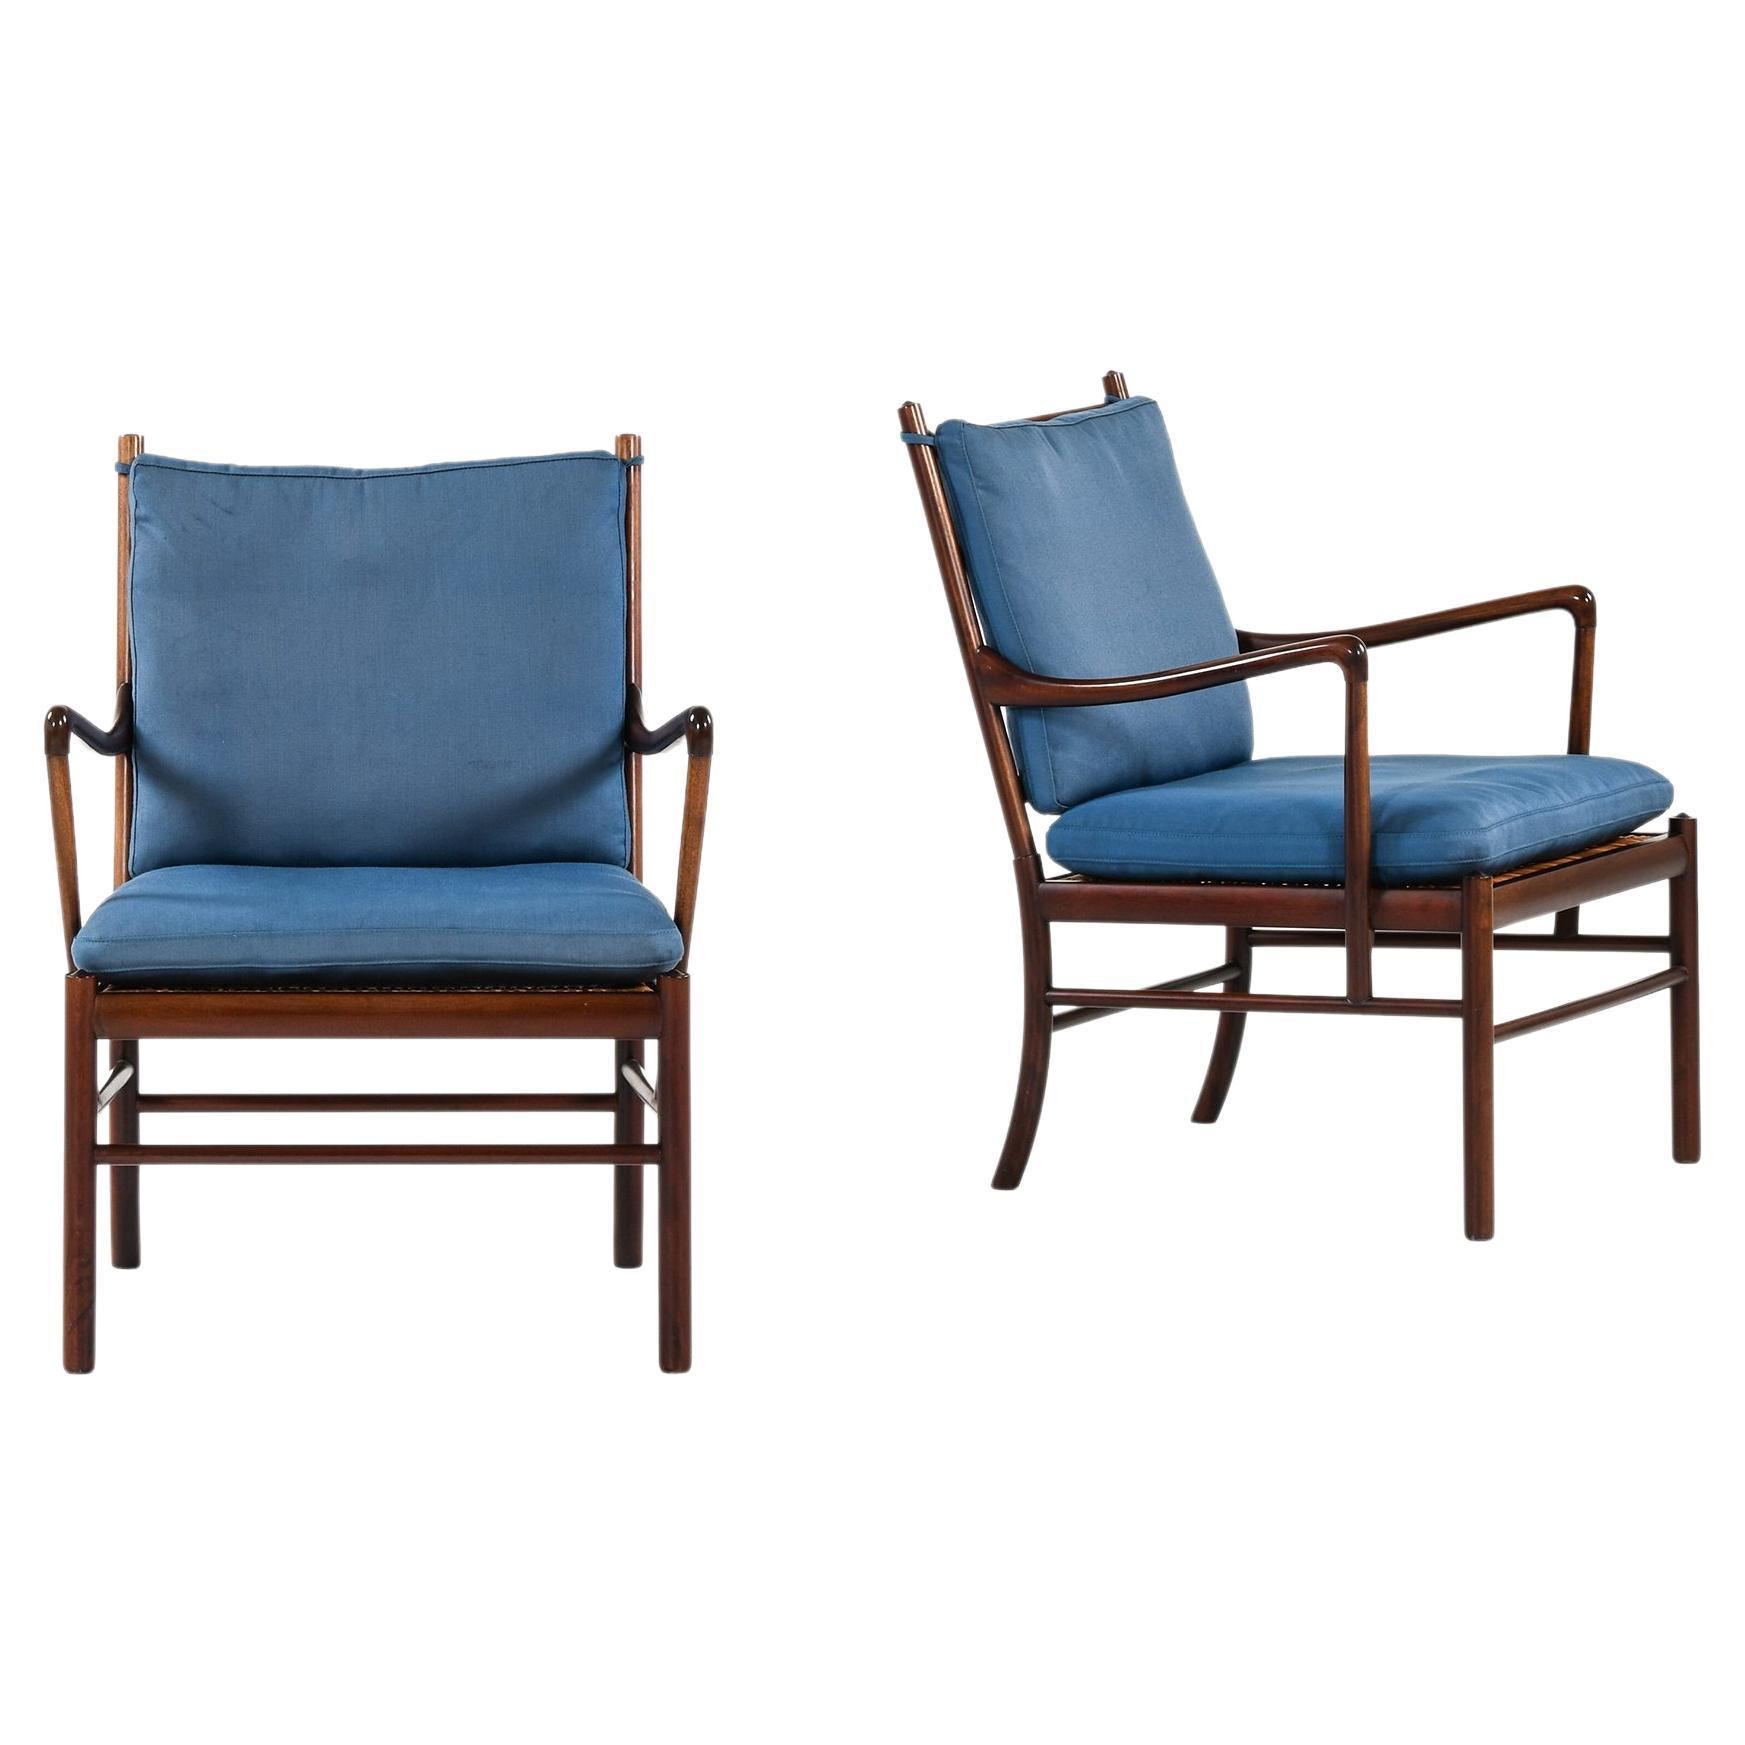 Colonial Easy Chairs in Mahogany, Woven Cane and Fabric by Ole Wanscher, 1960's For Sale